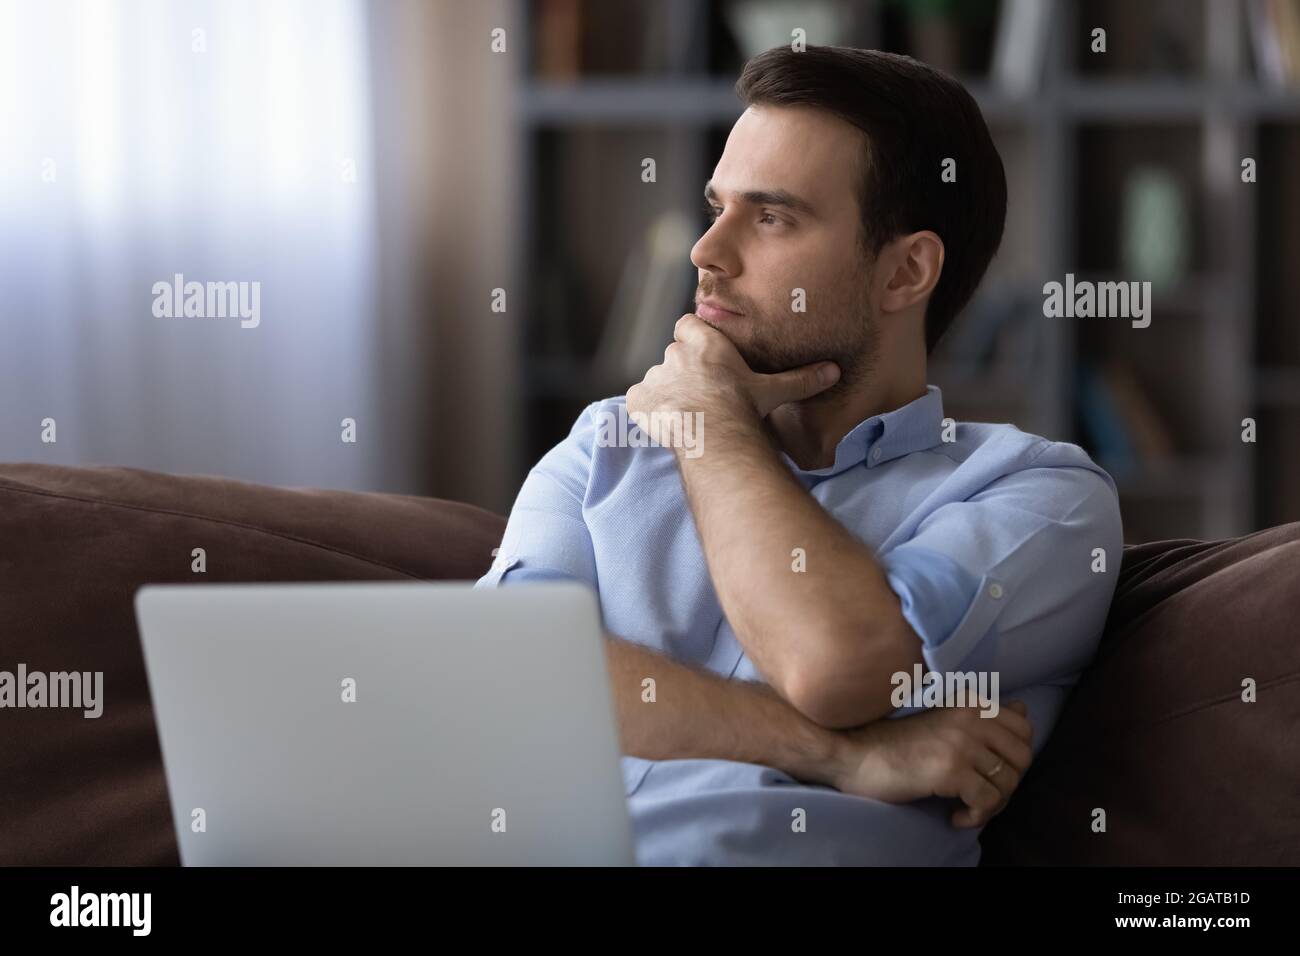 Contemplative young man distracted from laptop ponder on project solution Stock Photo